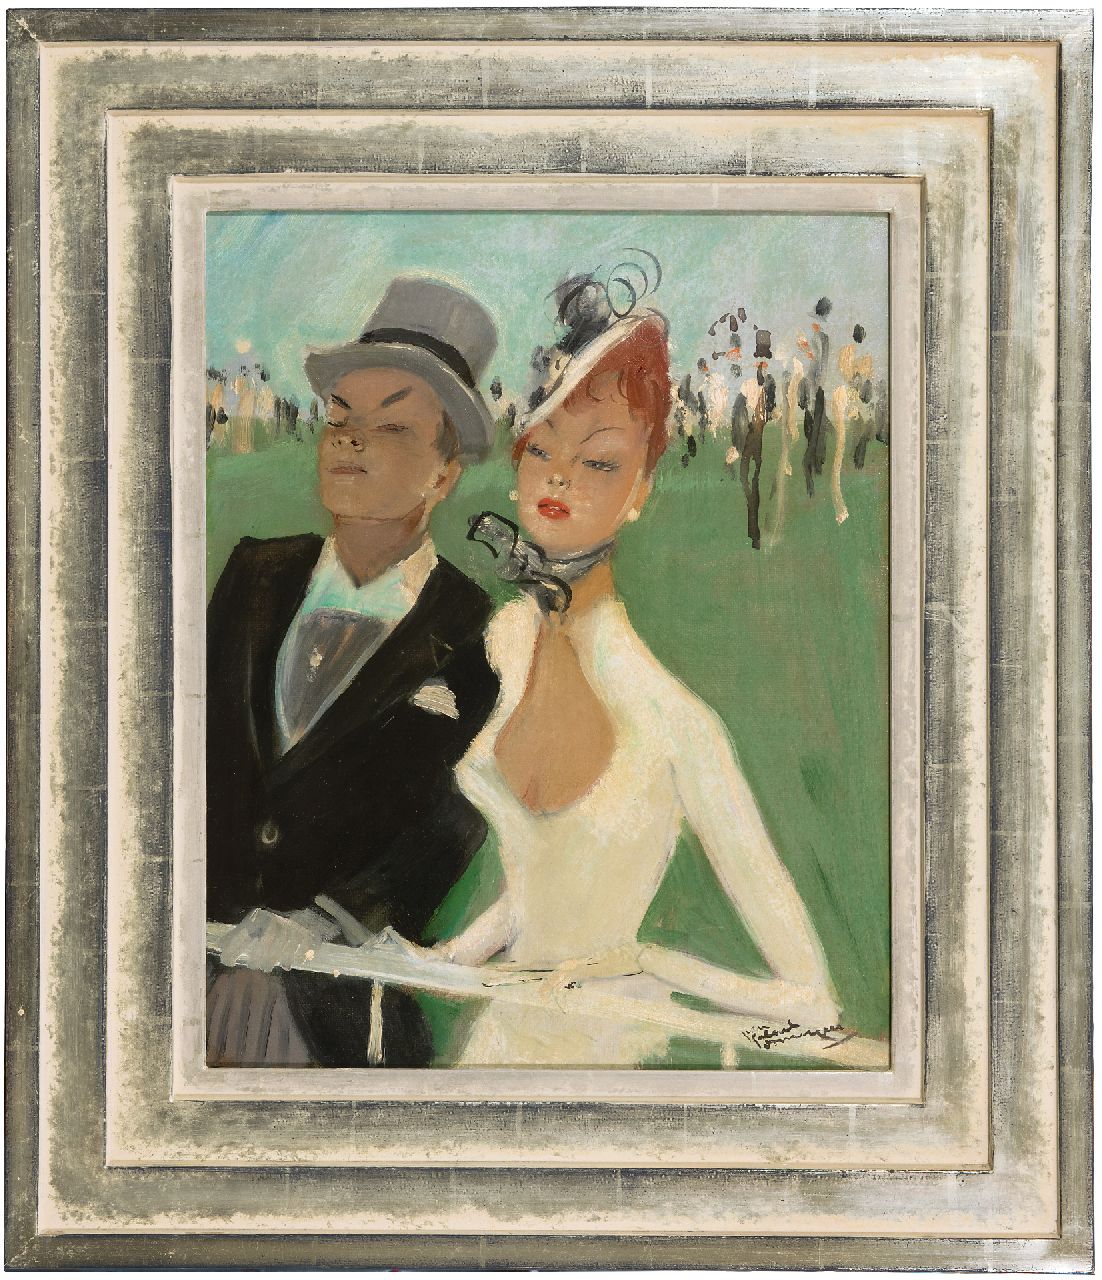 Domergue J.G.  | Jean-Gabriel Domergue | Paintings offered for sale | Au grand steeple, oil on board 40.9 x 32.8 cm, signed l.r. and dated '29 on the reverse